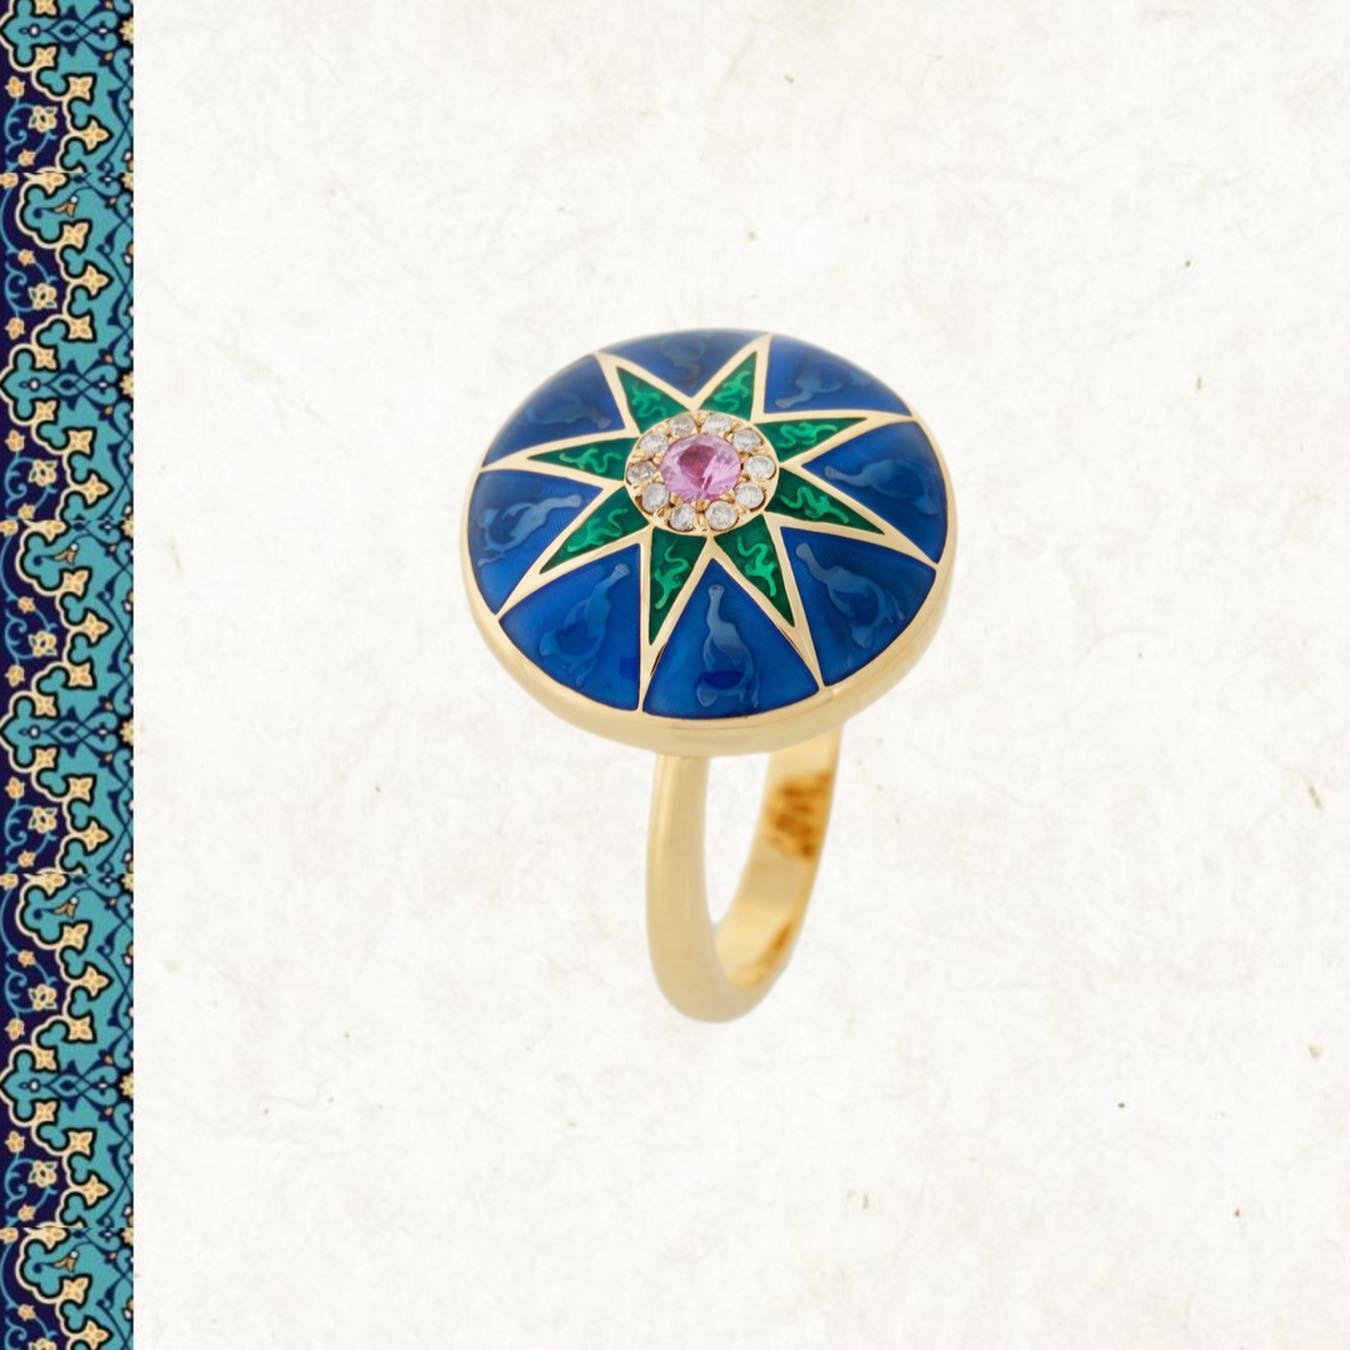 The Pottery Star ring is handcrafted with 18k gold, featuring white diamonds, sapphire, and complemented by green and blue enamel.